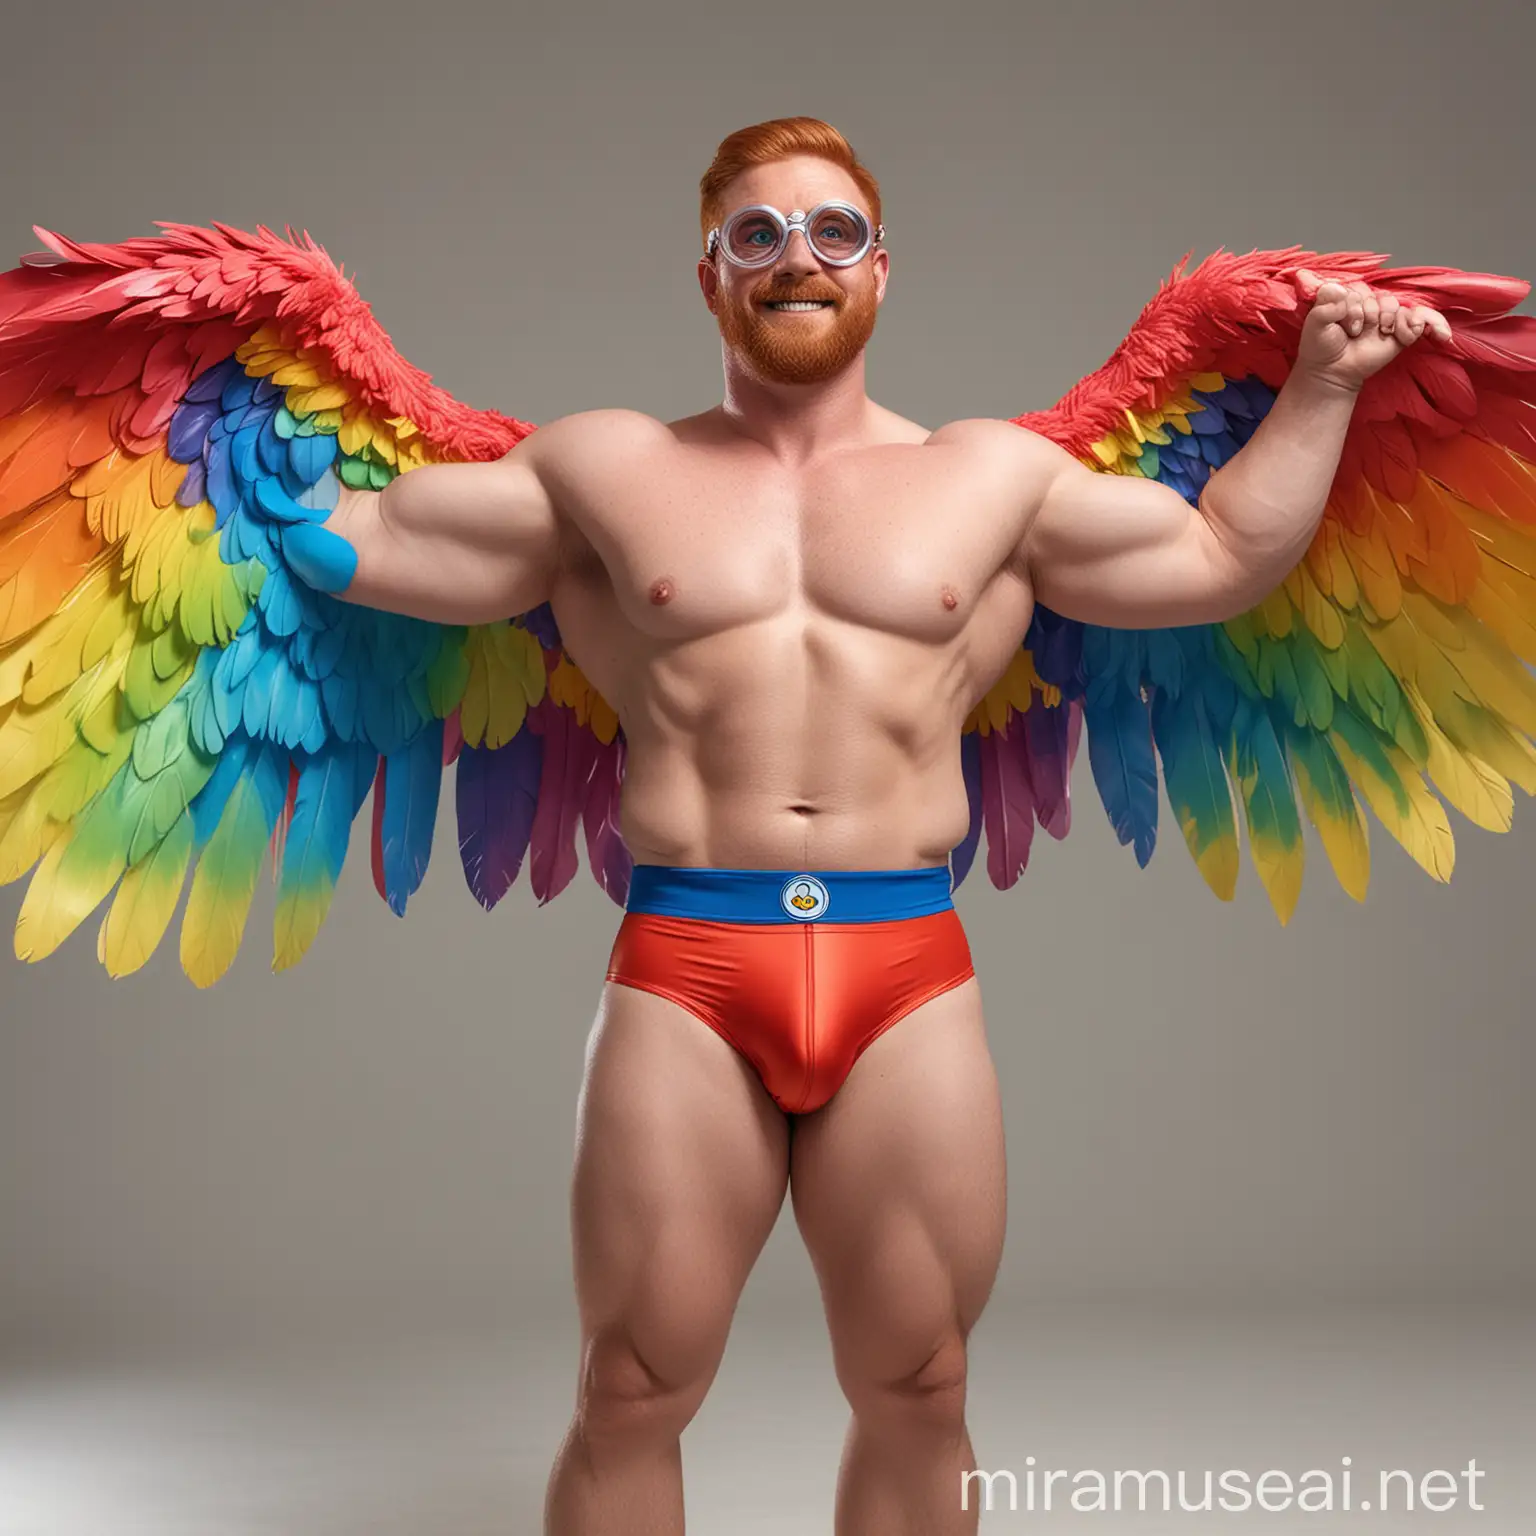 Studio Light Subtle Smile Topless 40s Ultra Beefy Red Head Bodybuilder Daddy Big Eyes with Beard Wearing Multi-Highlighter Bright Rainbow Colored See Through huge Eagle Wings Shoulder Jacket short shorts and Flexing his Big Strong Arm Up with Doraemon Goggles on forehead